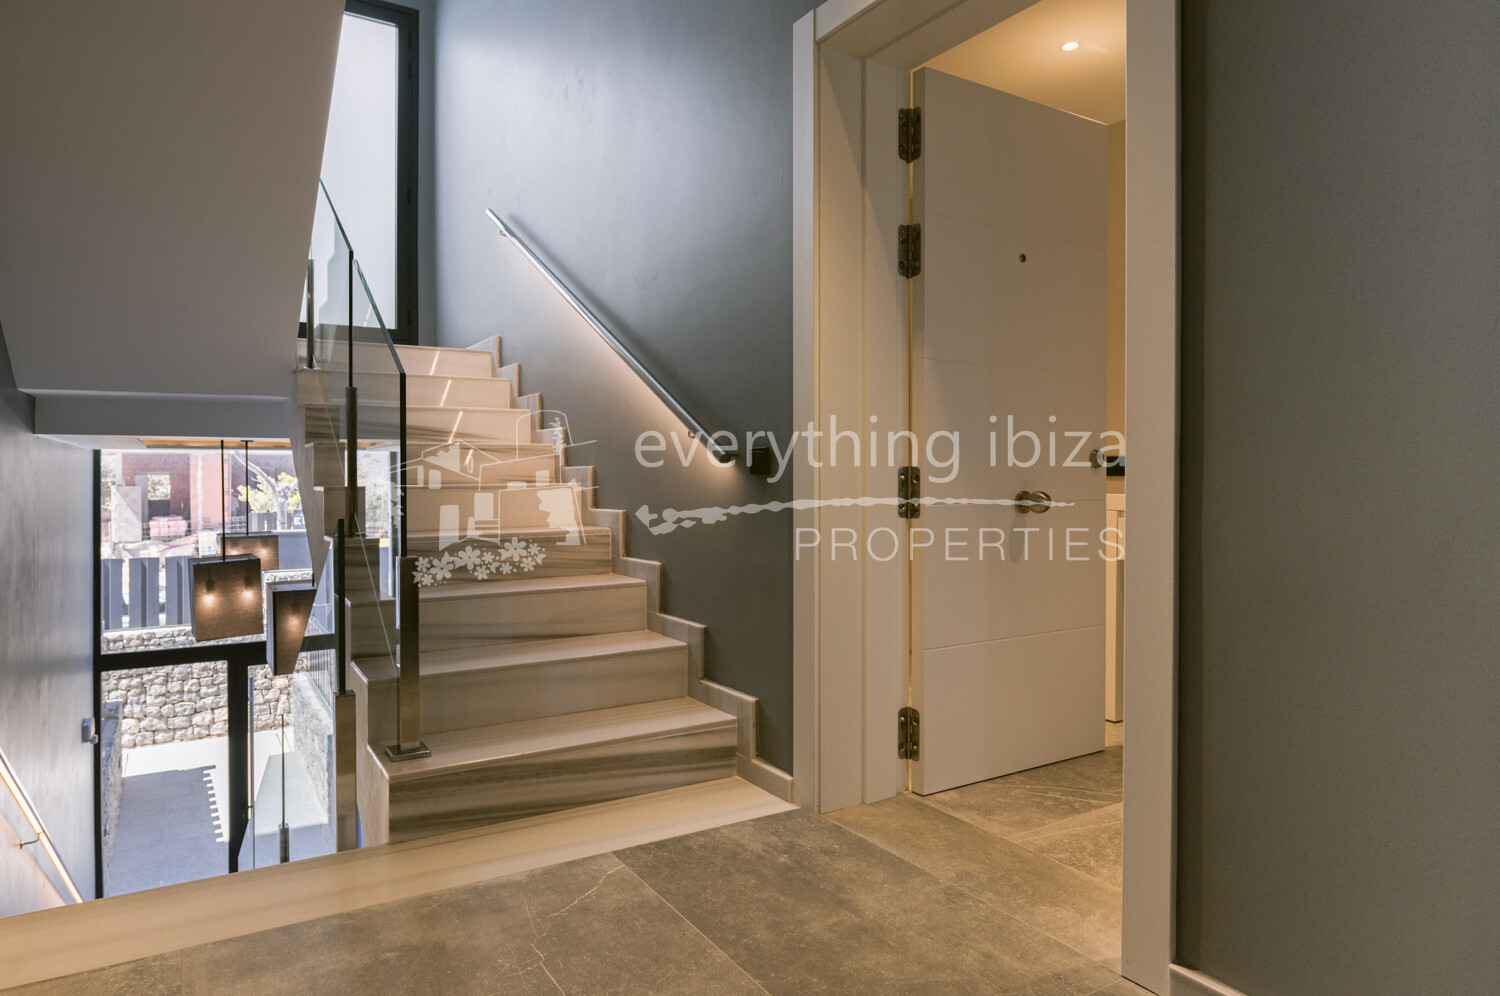 Luxury Modern 3 Bedroomed Apartment Close to Talamanca Beach, ref. 1694, for sale in Ibiza by everything ibiza Properties